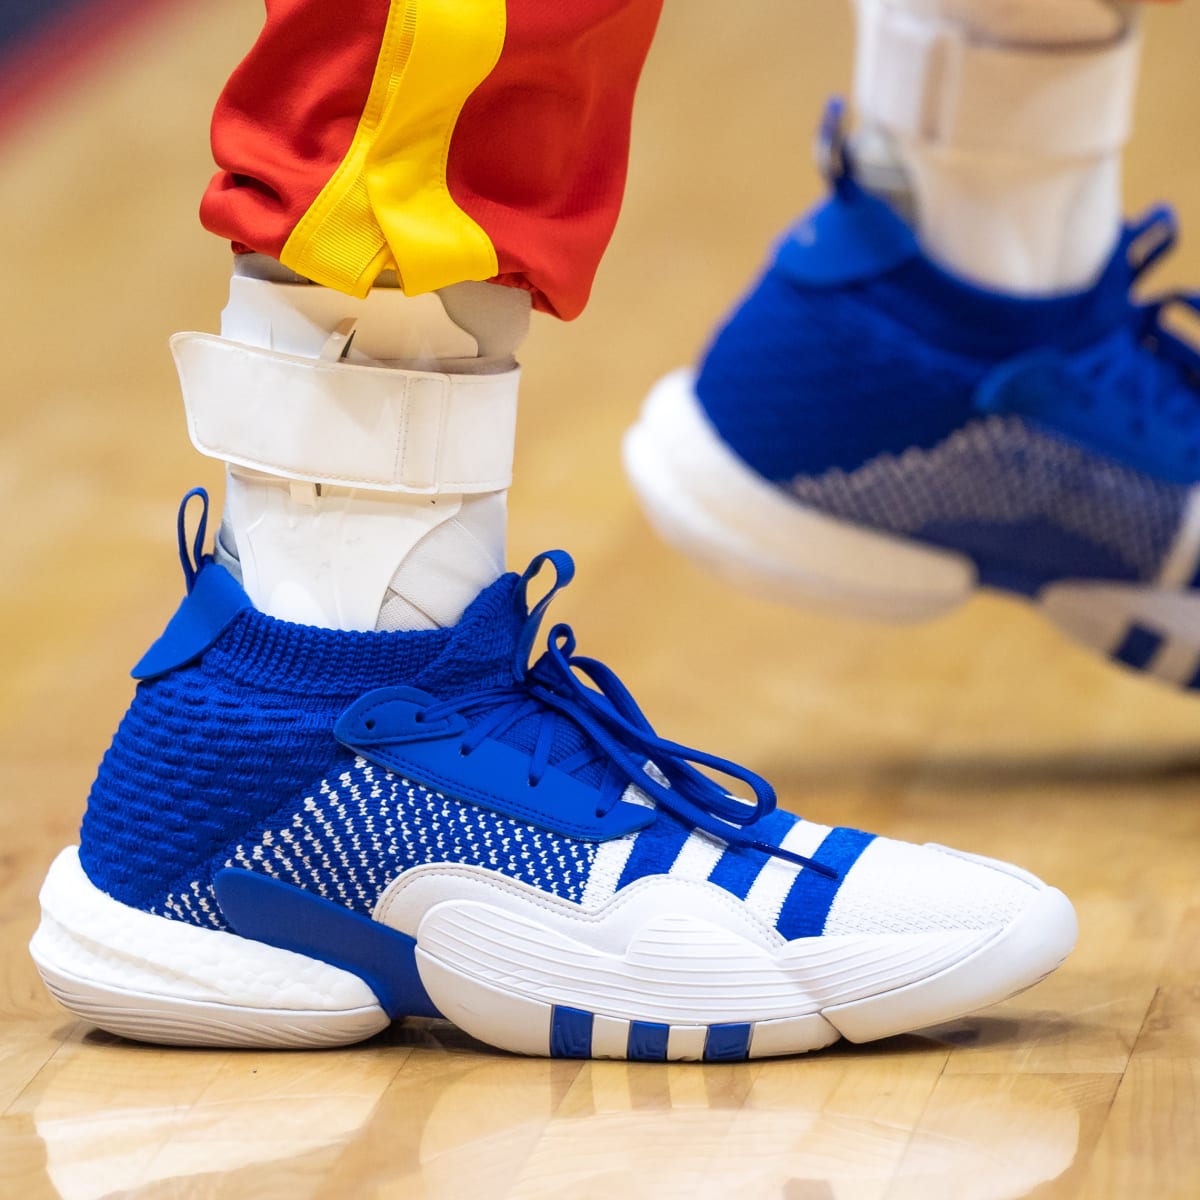 Geaccepteerd Kwestie rijk Adidas Trae Young 2.0 Basketball Shoes Are Discounted Online - Sports  Illustrated FanNation Kicks News, Analysis and More